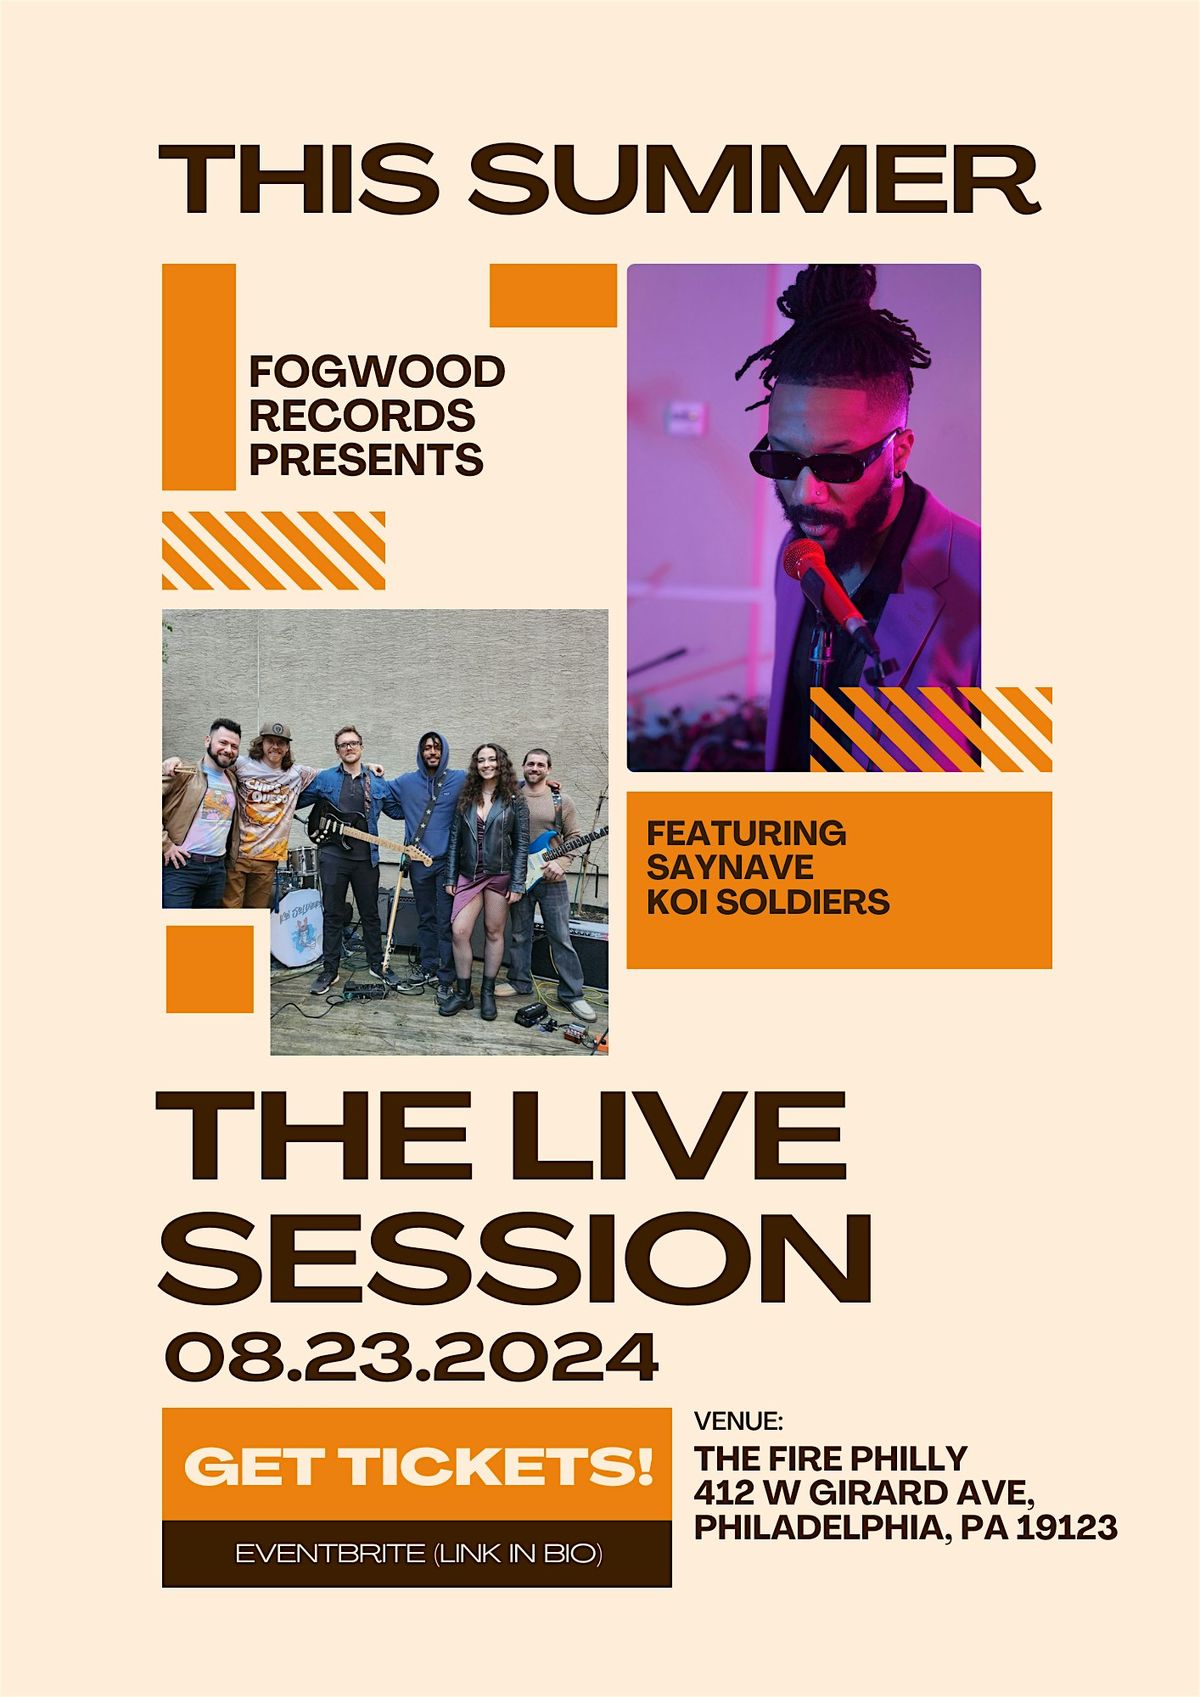 Fogwood Records presents: The Live Session